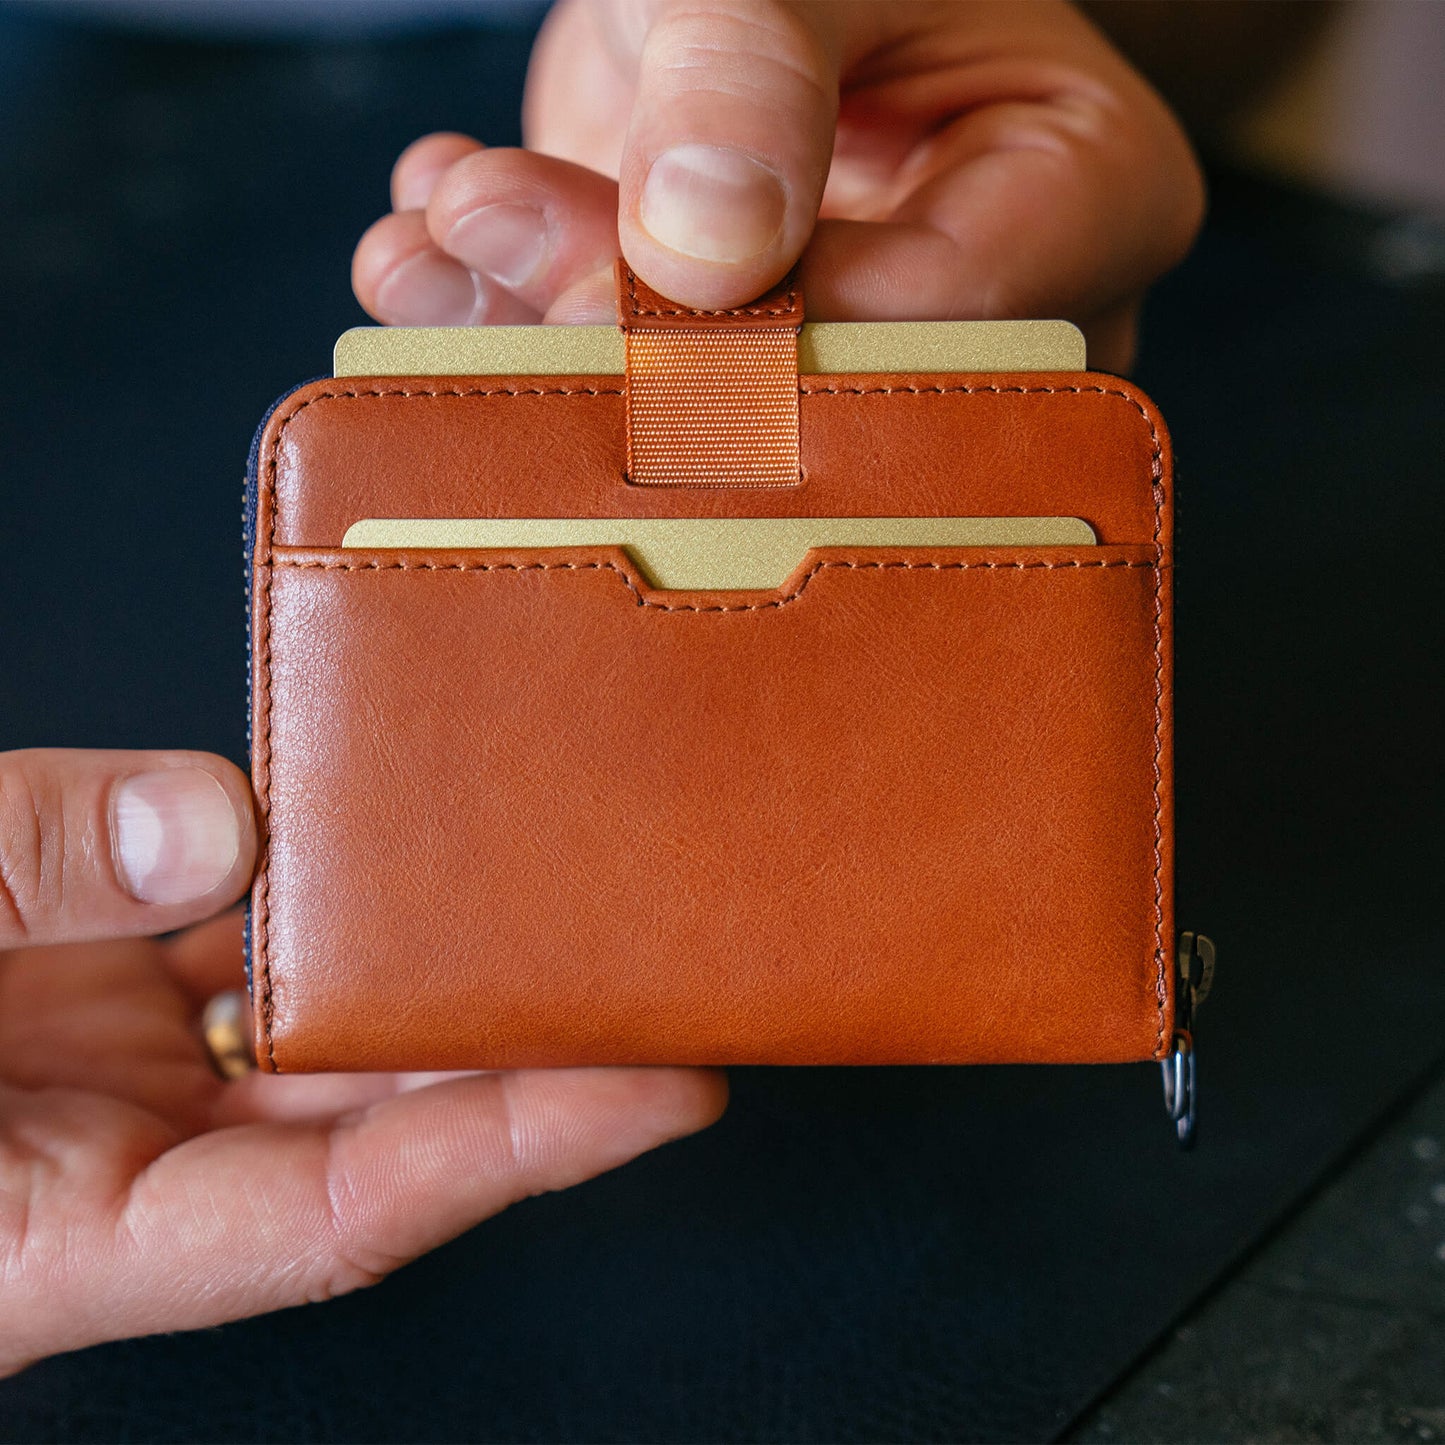 Versatile Mayfair wallet for daily use